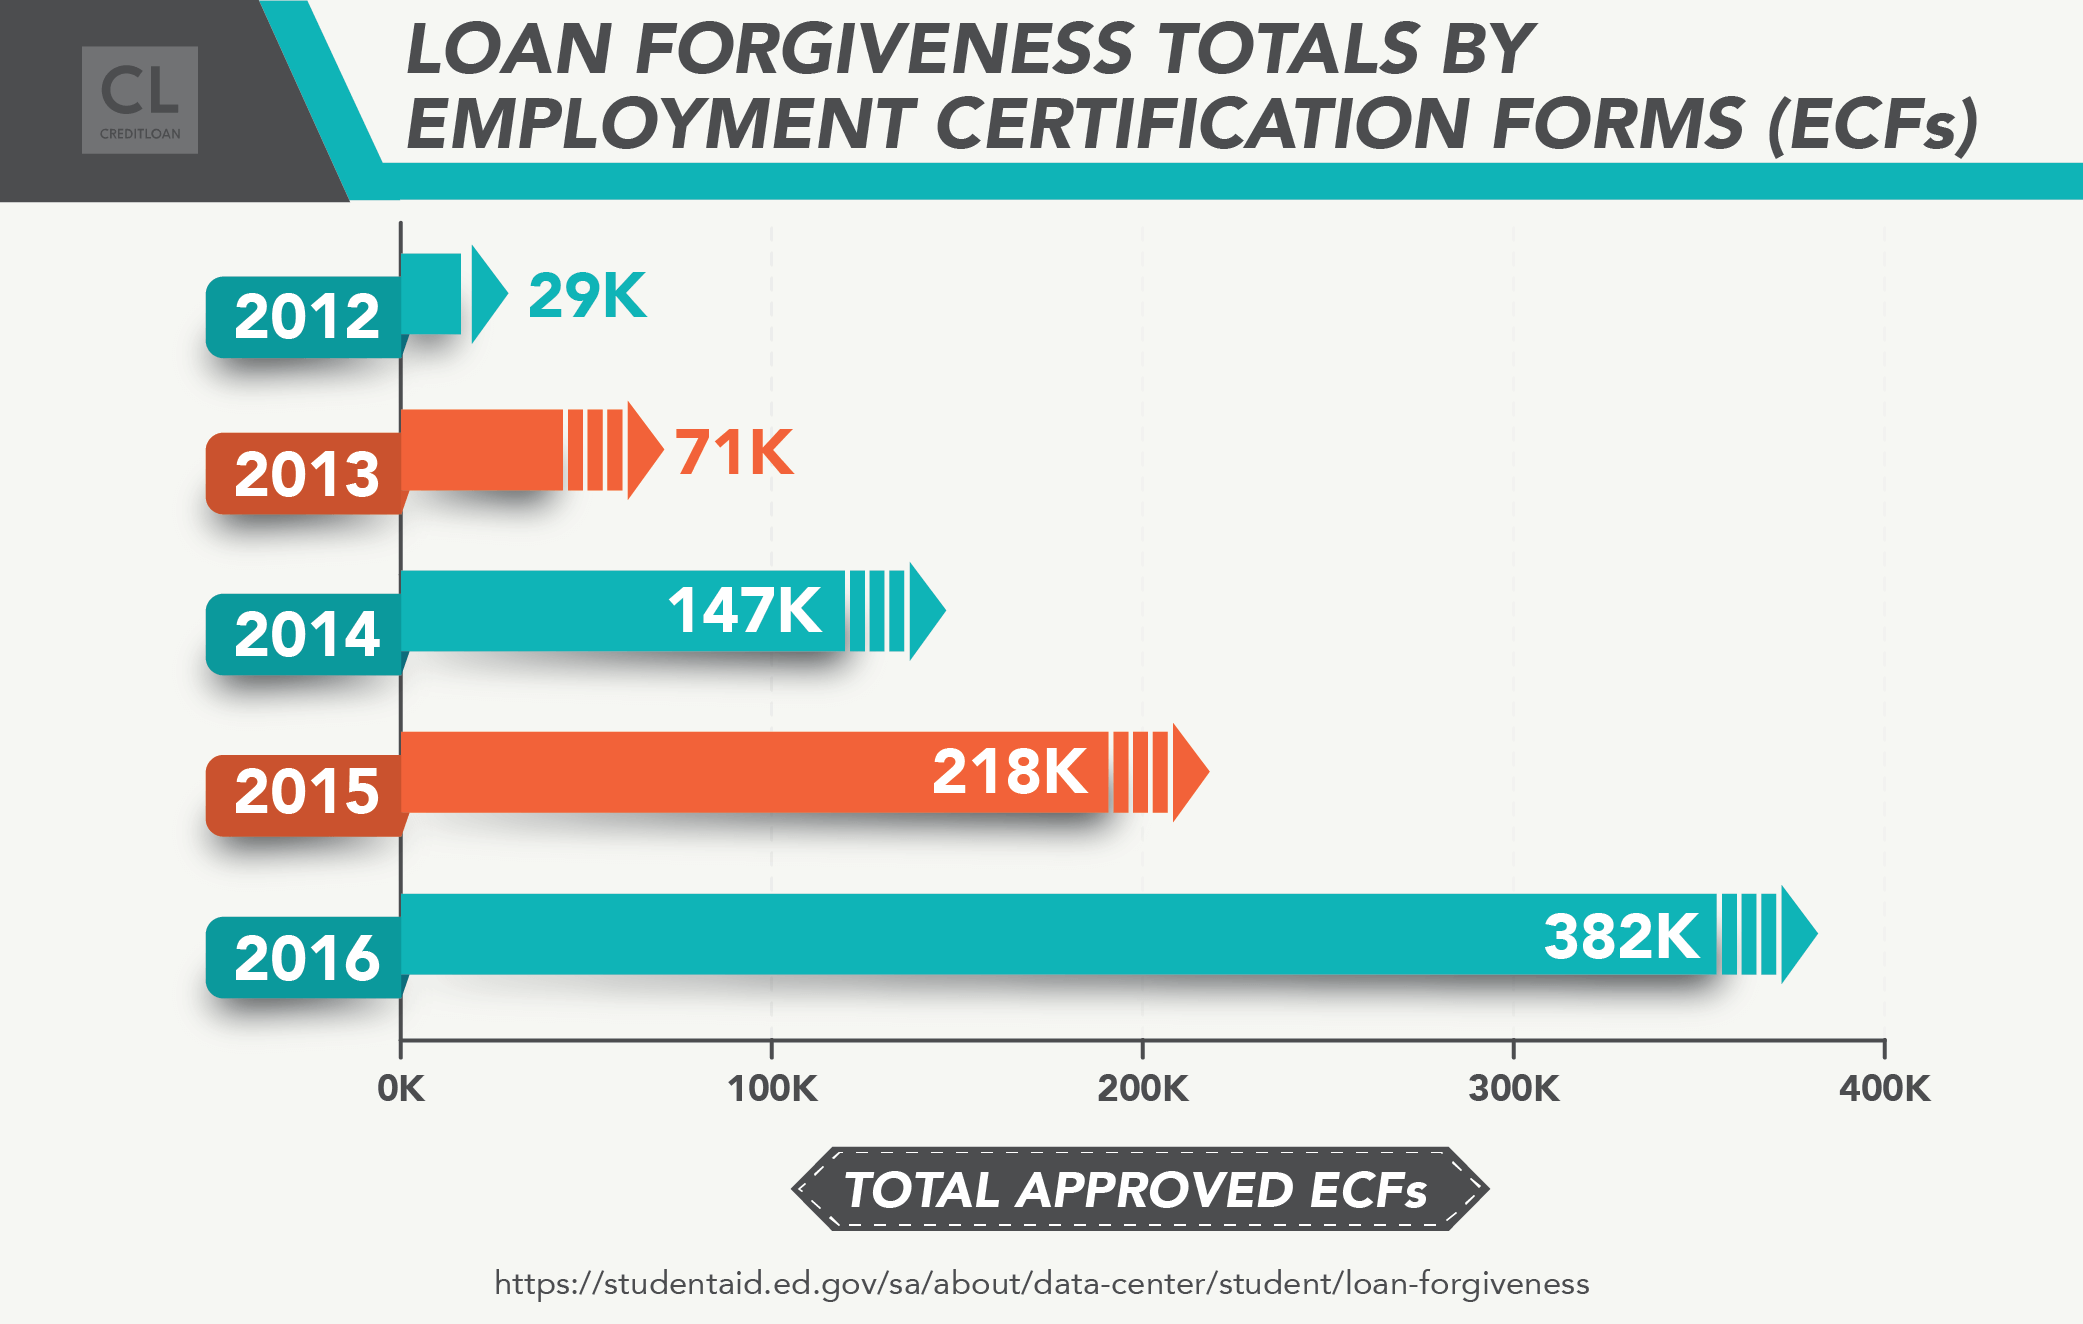 Loan Forgiveness Totals by Employment Certification Forms (ECFs) from 2012-2016